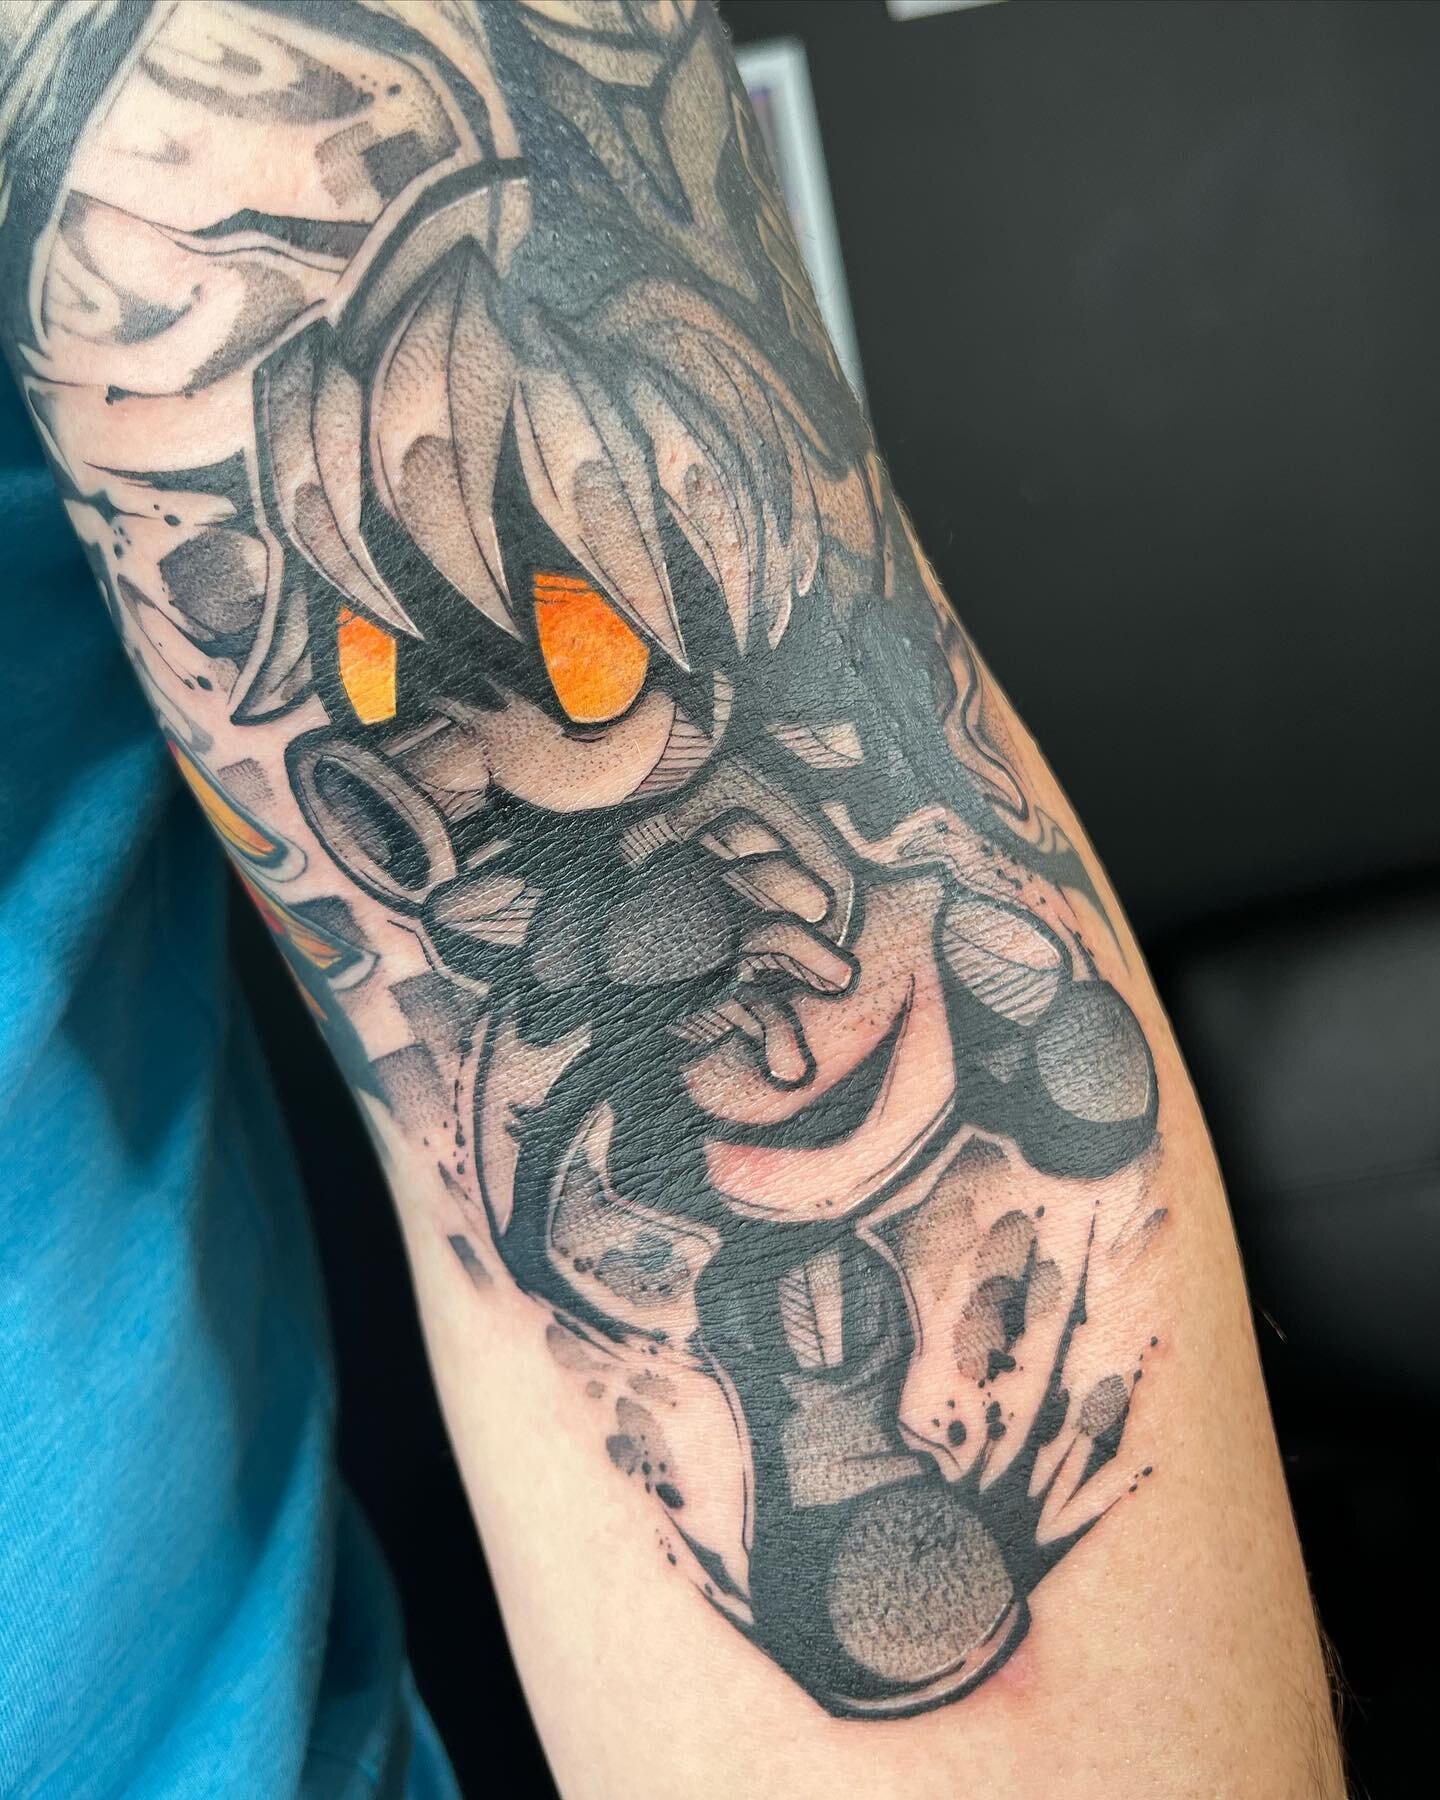 Hello friends! It&rsquo;s been a while since I posted! This Deku Link is one of the smaller pieces I&rsquo;ve done recently and it really just functions as a bit of filler for this sleeve in progress, but I thought it was so cool so I wanted to post 